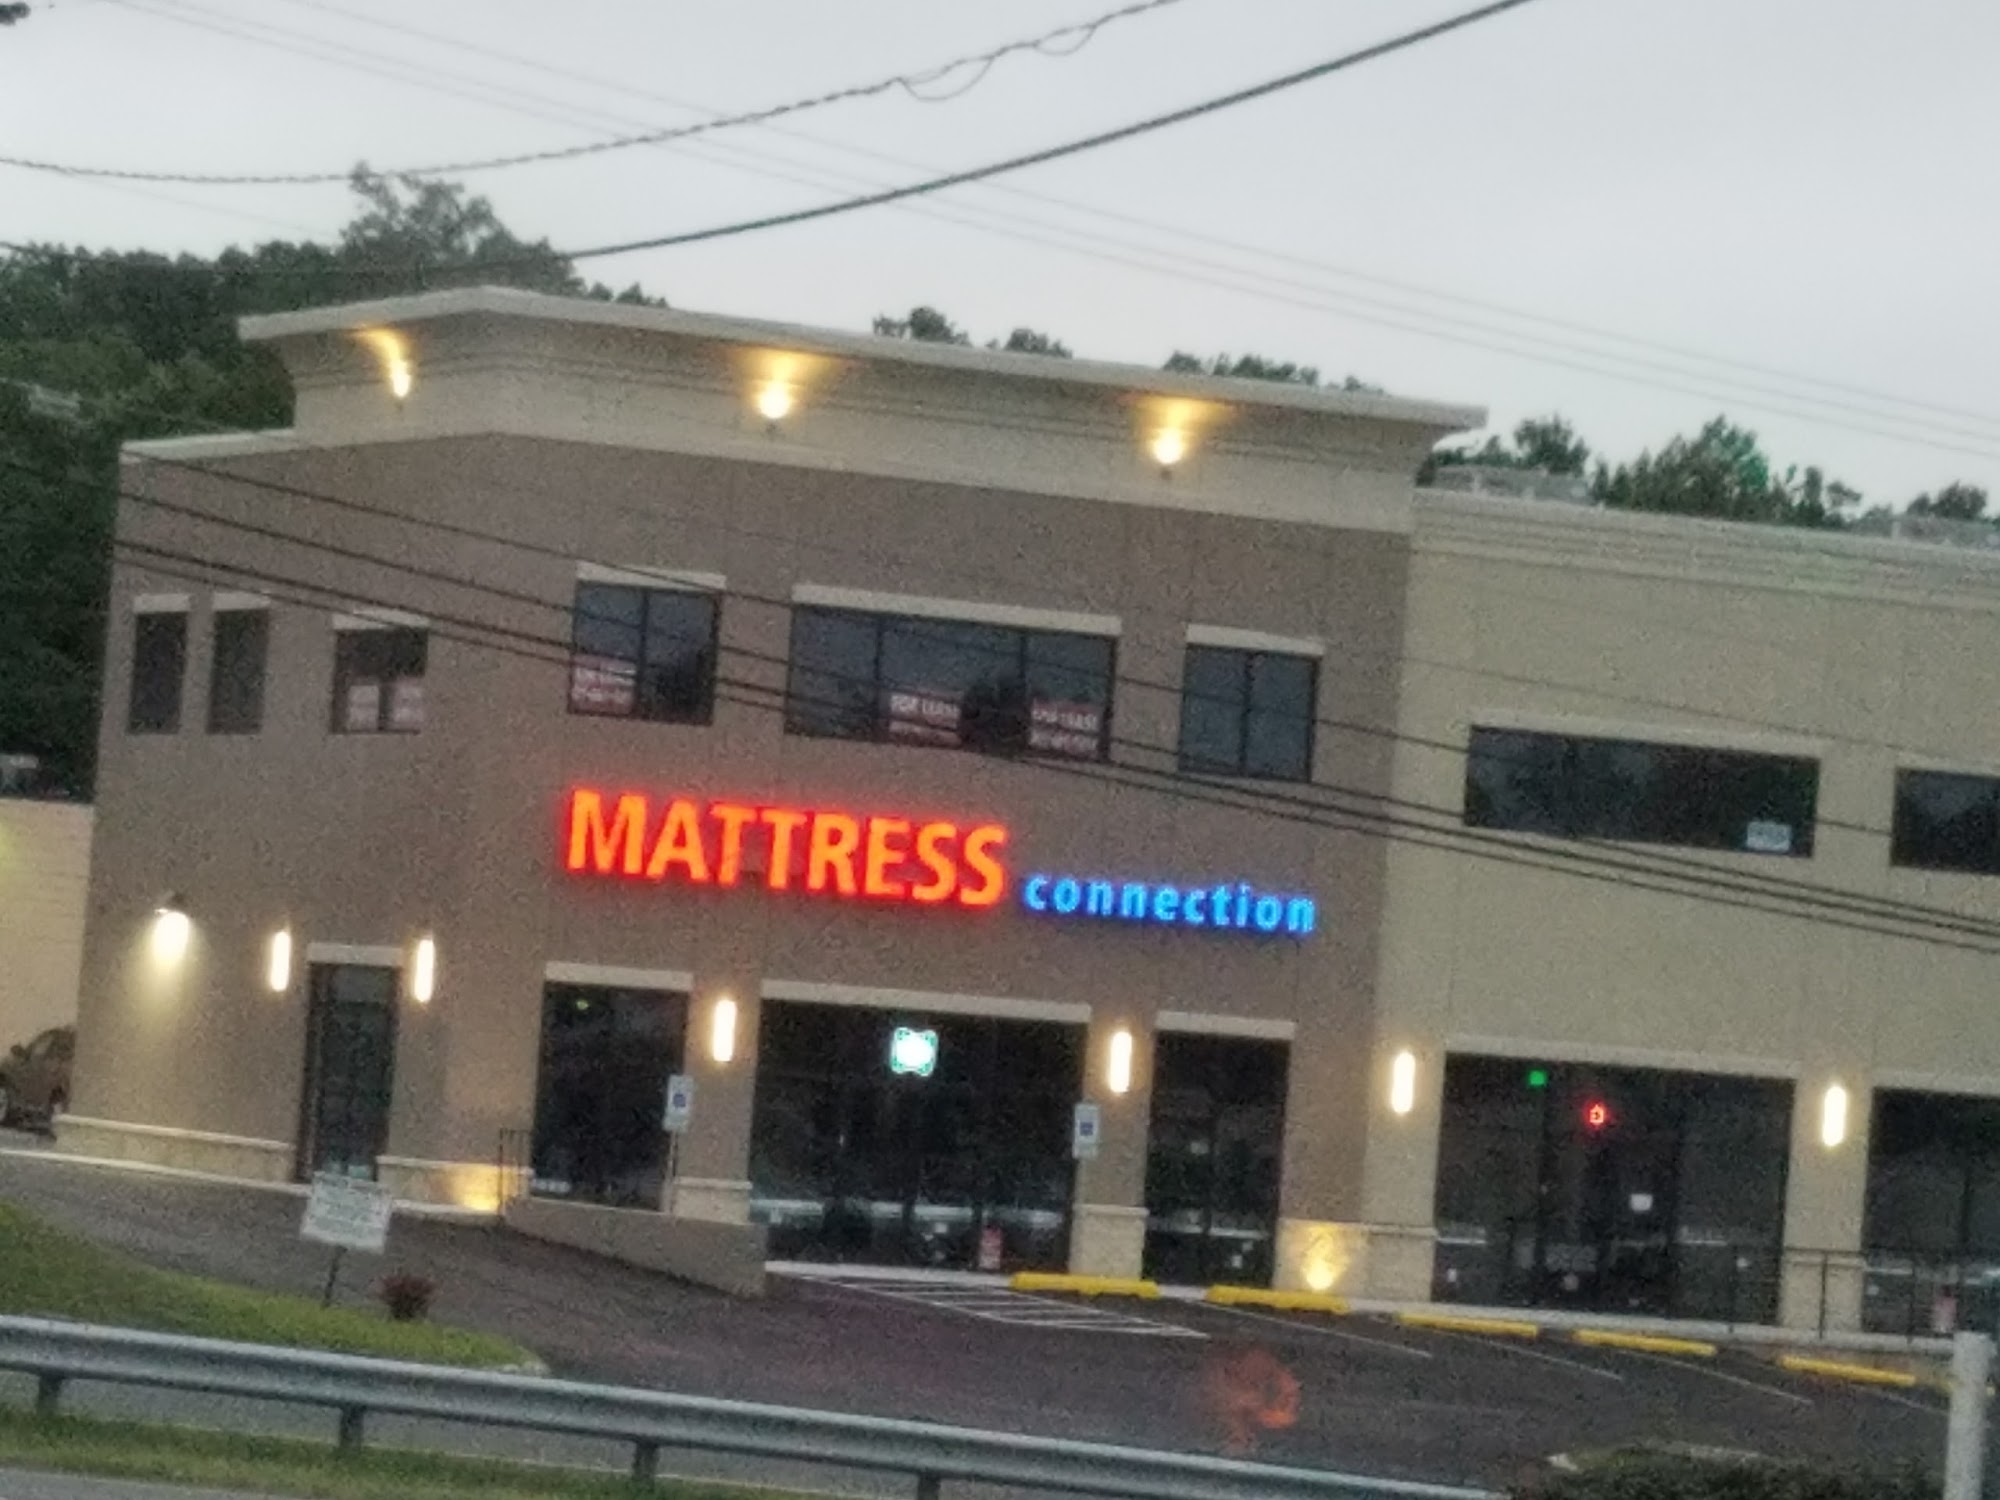 The Mattress Connection of Catonsville